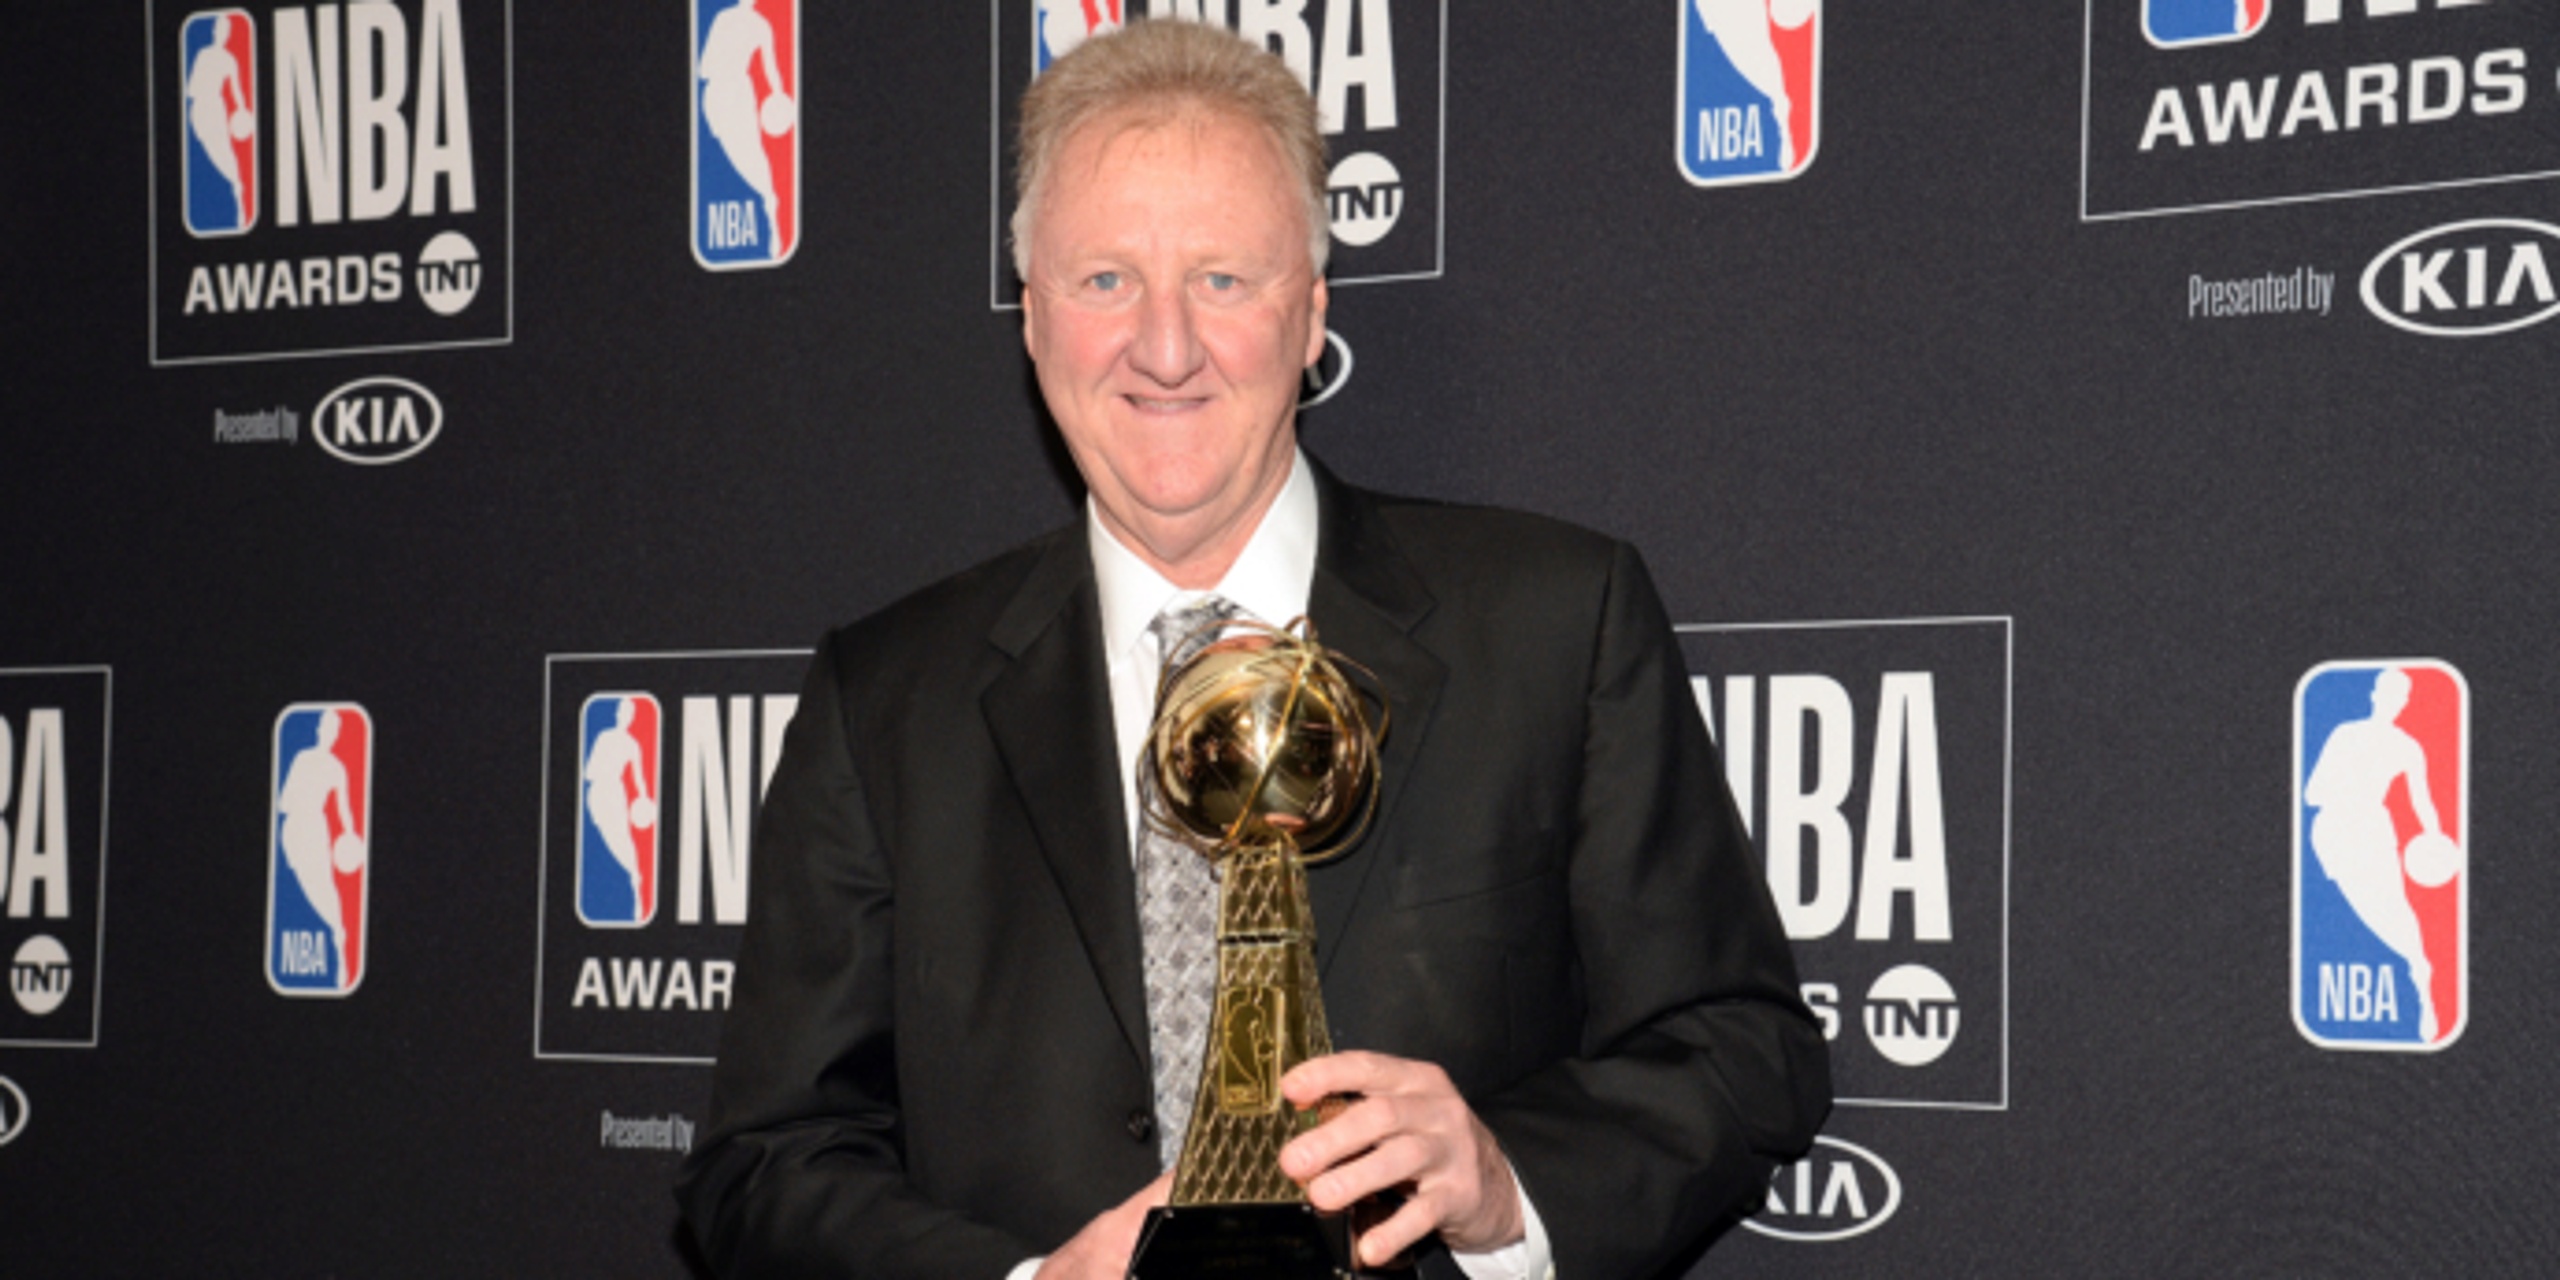 Larry Bird no longer has active role with Indiana Pacers